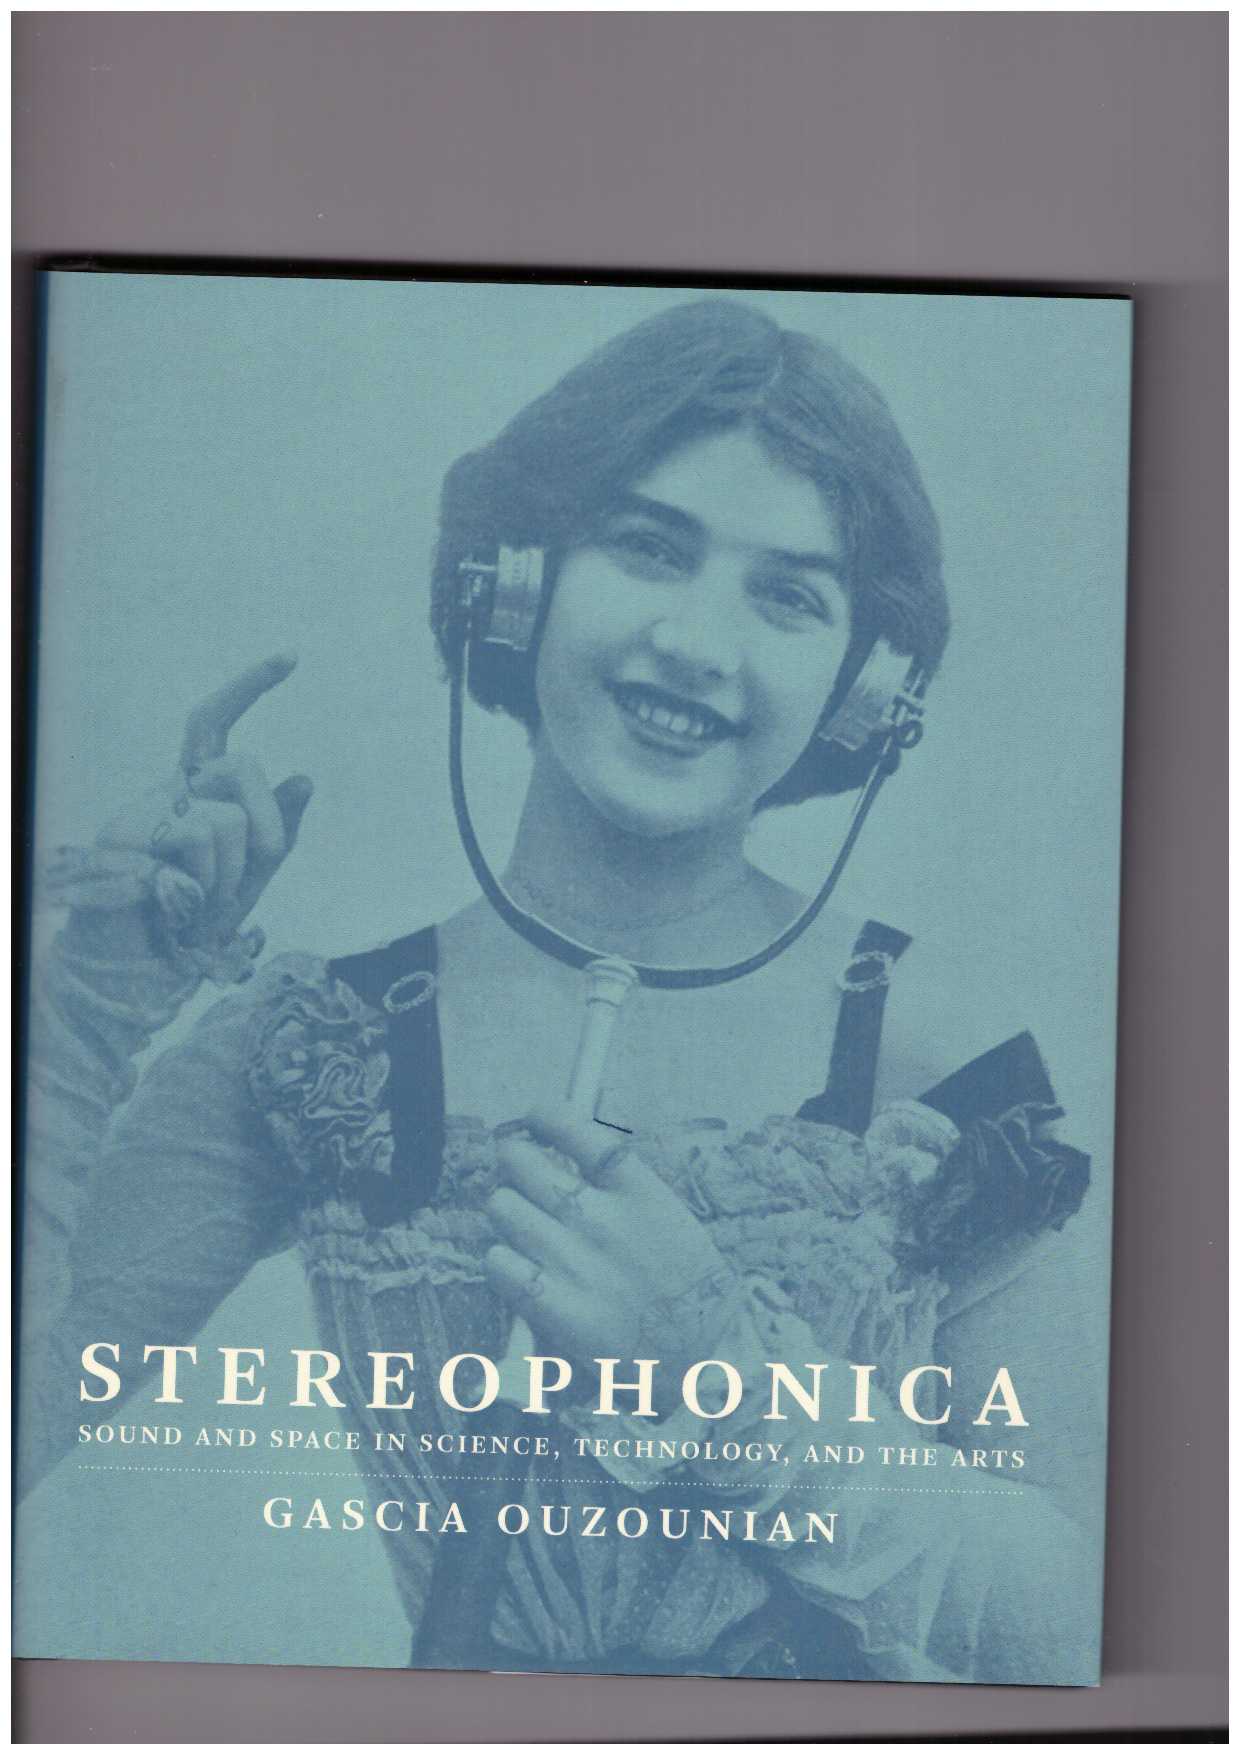 OUZOUNIAN, Gascia  - Stereophonica. Sound and Space in Science, Technology, and the Arts